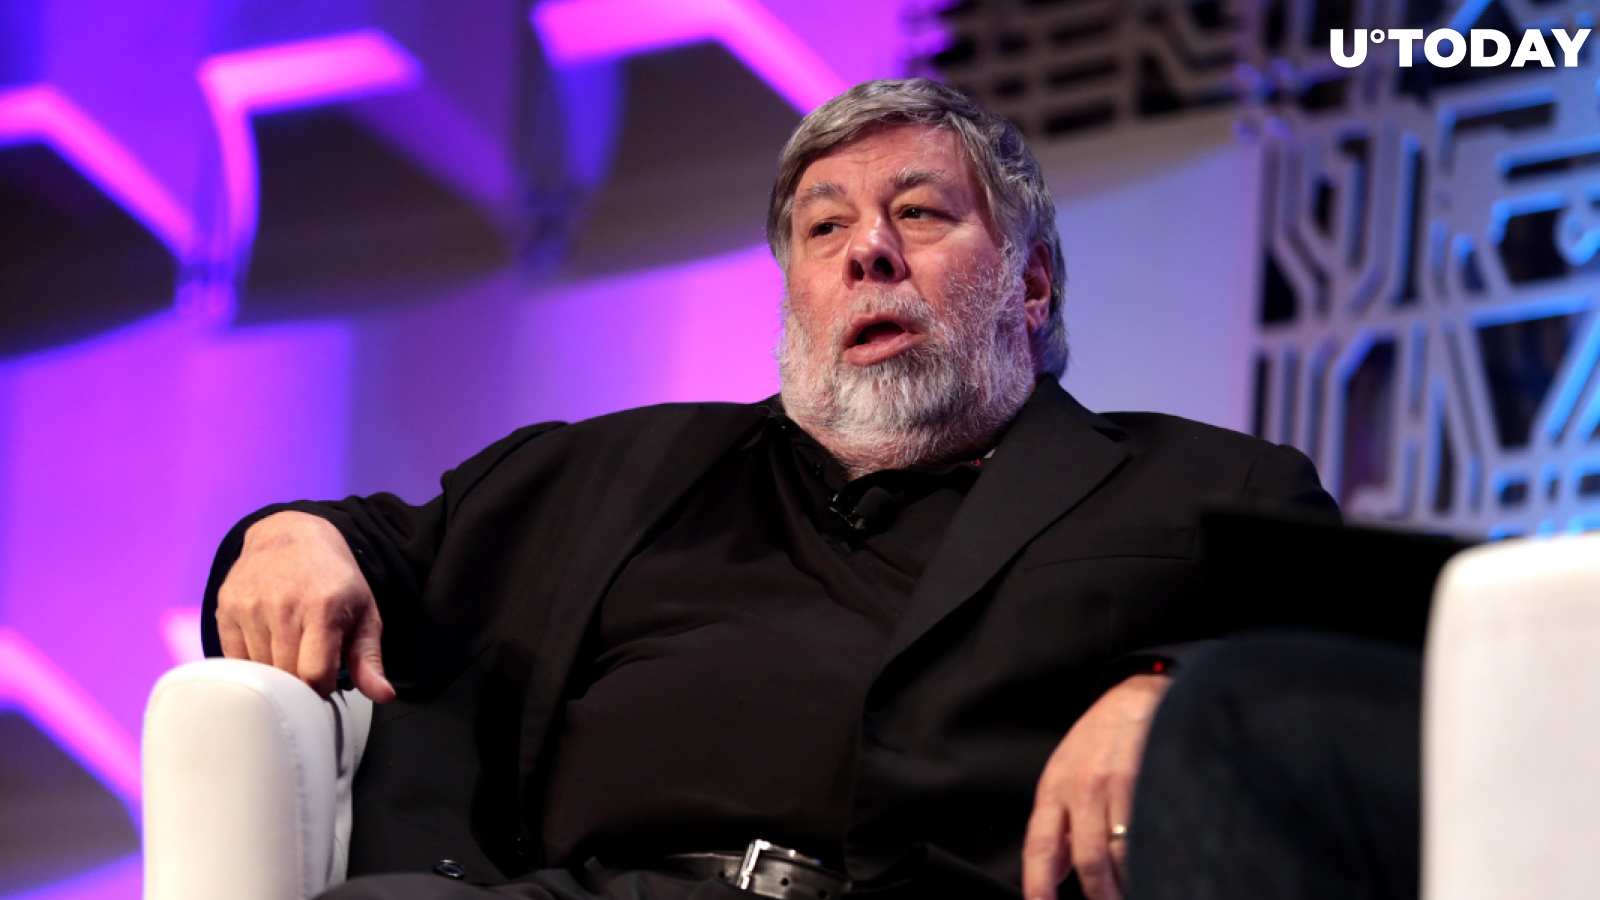 Apple Co-Founder Steve Wozniak Claims That Governments Will Ban Crypto If It Becomes Too Big